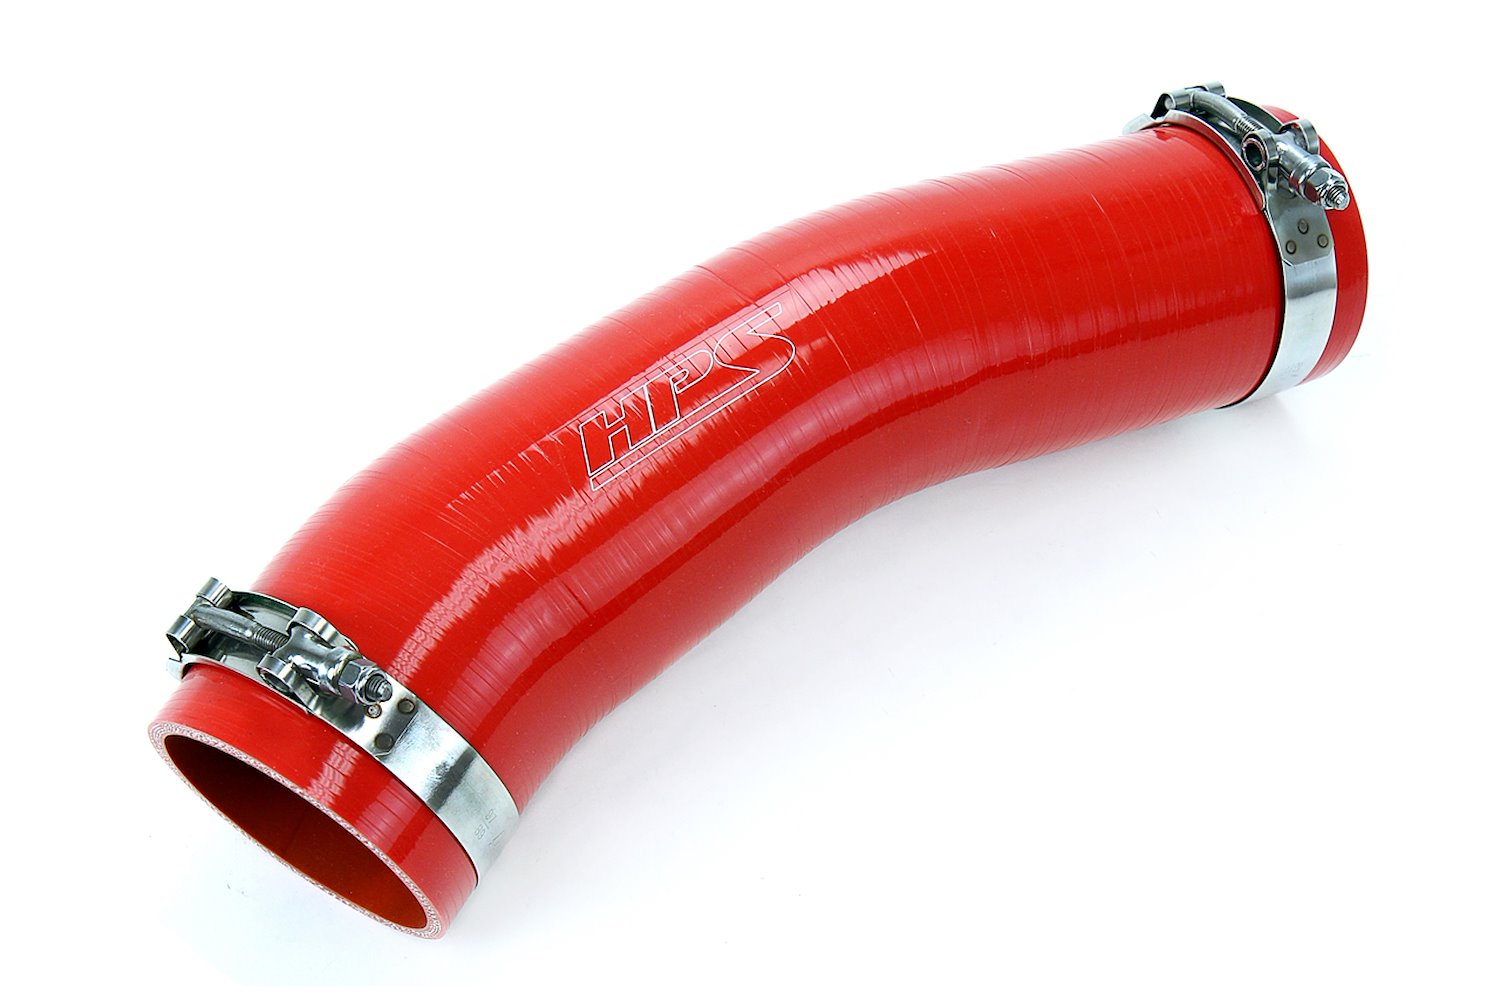 57-1289-RED Silicone Air Intake, Replace Stock Restrictive Air Intake, Improve Throttle Response, No Heat Soak